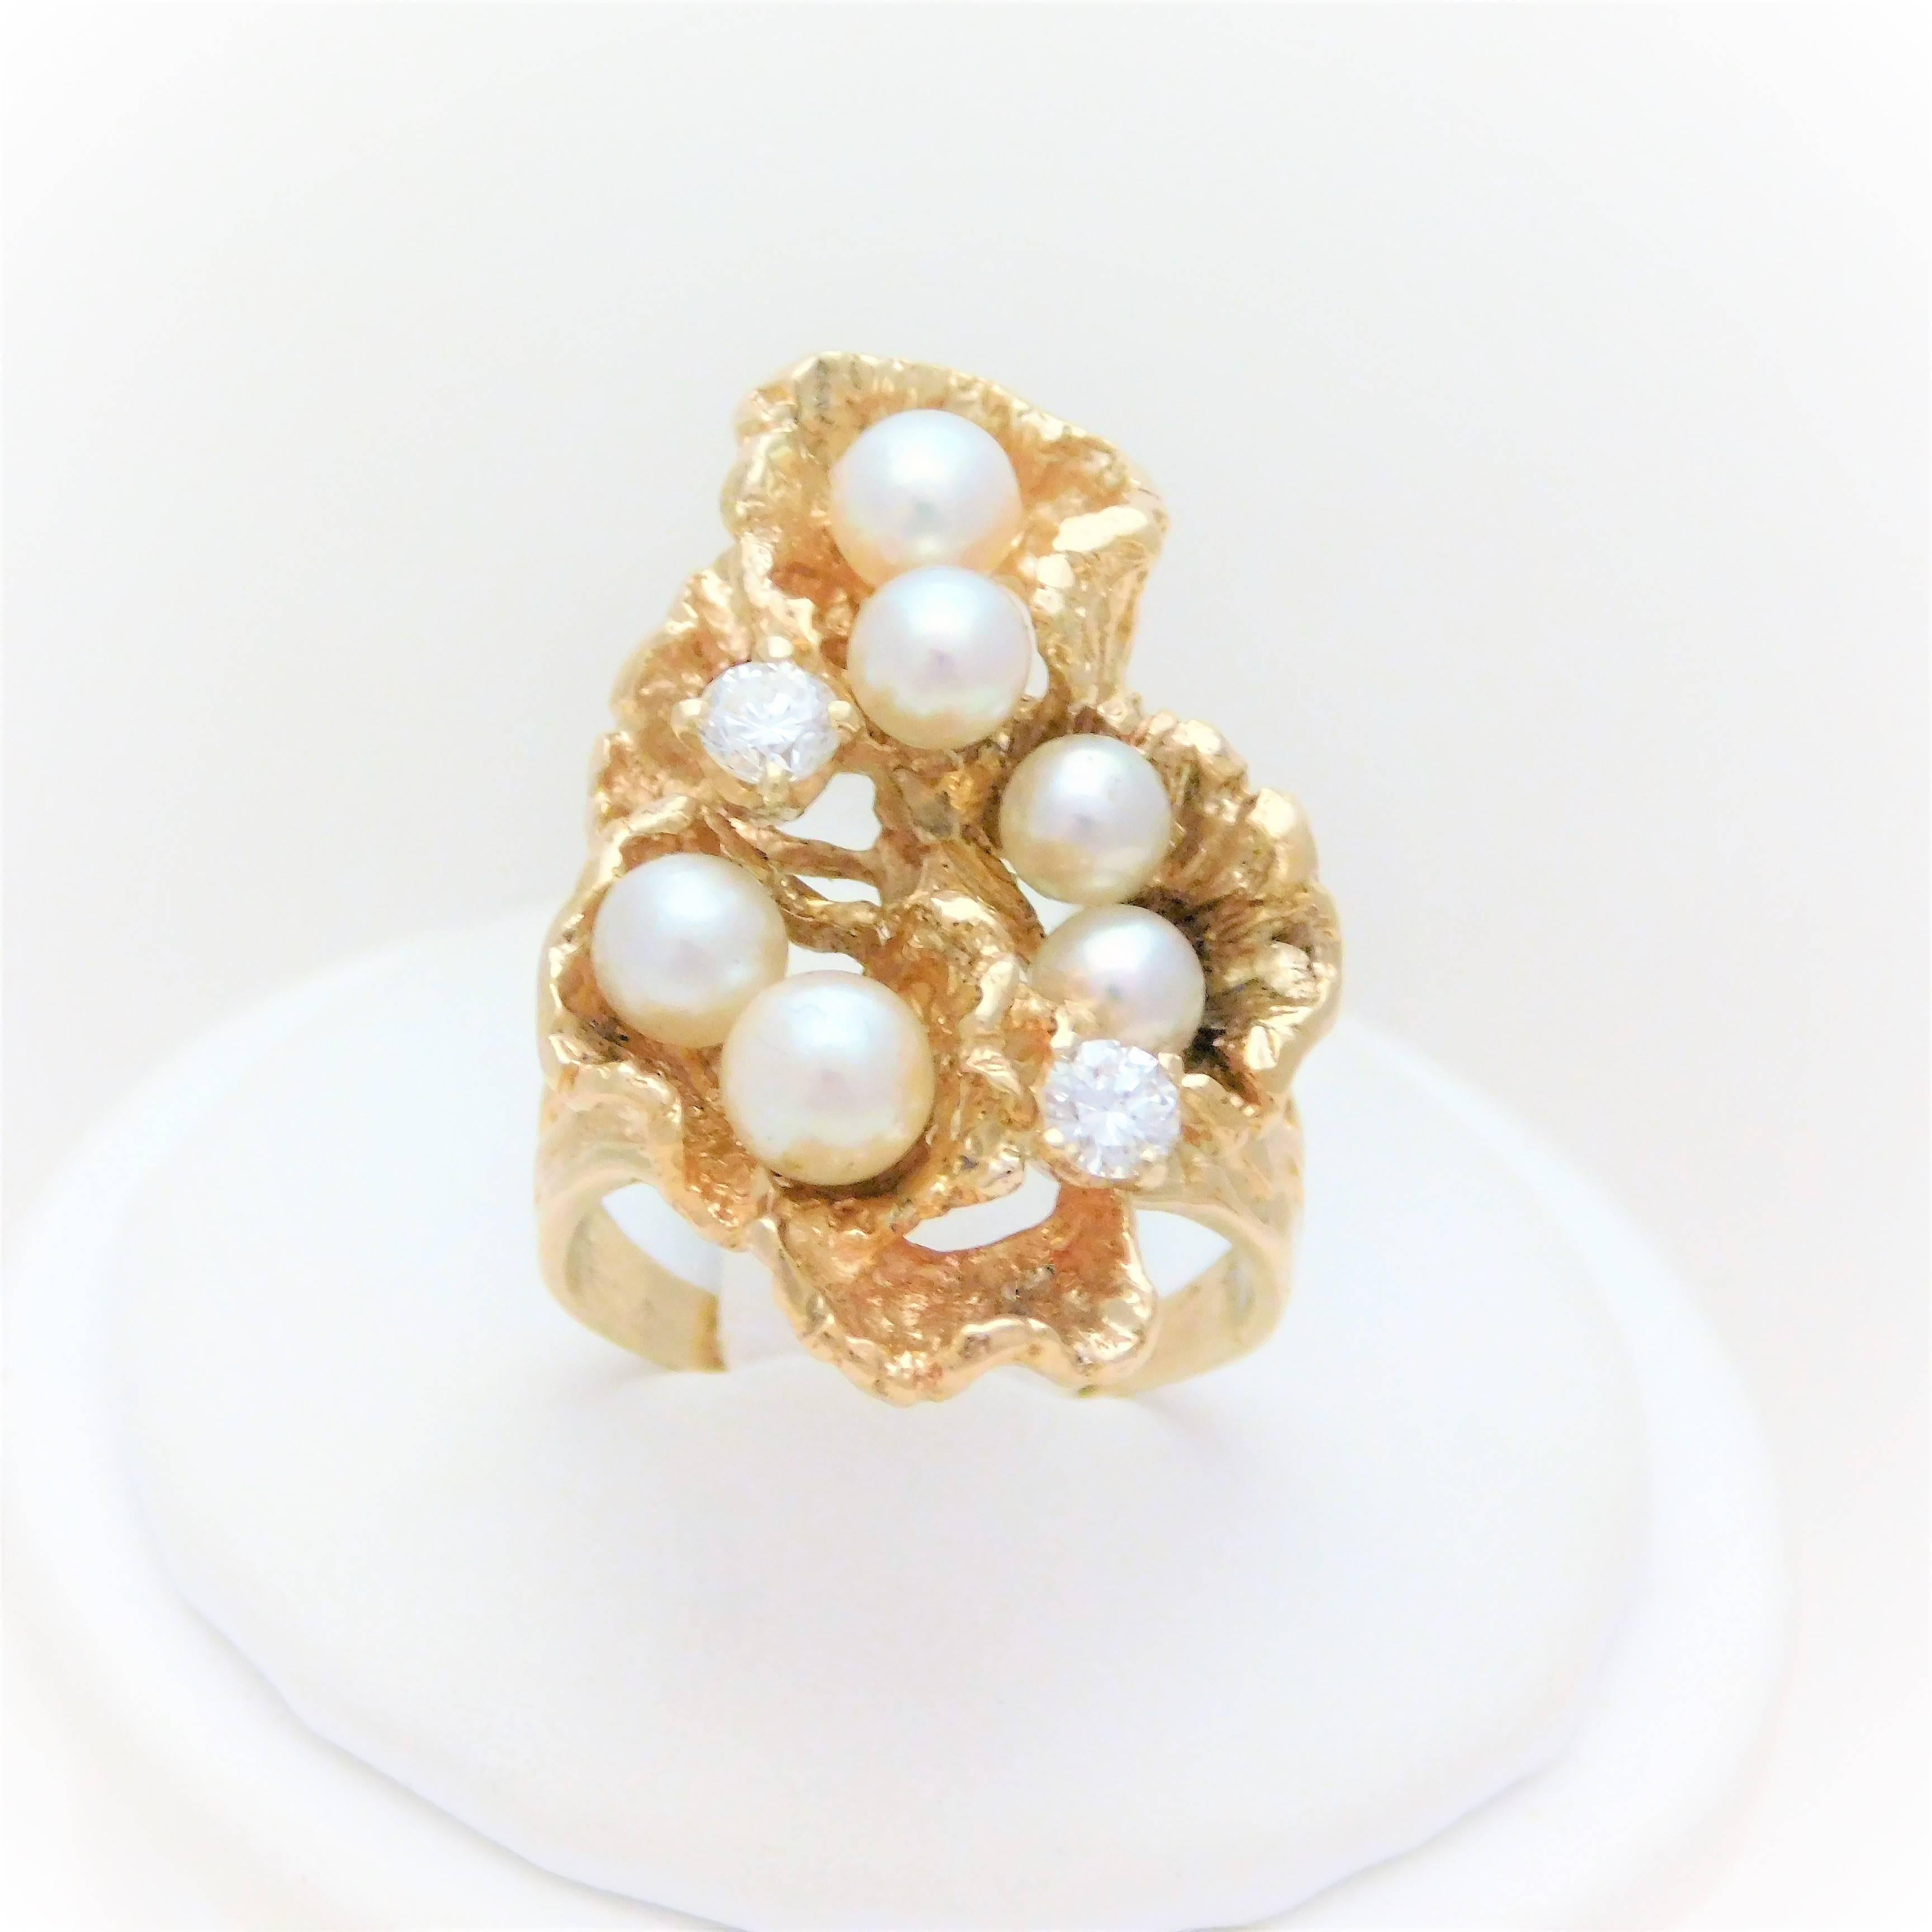 Women's Handmade 14 Karat Diamond and Pearl “Oyster” Ring For Sale